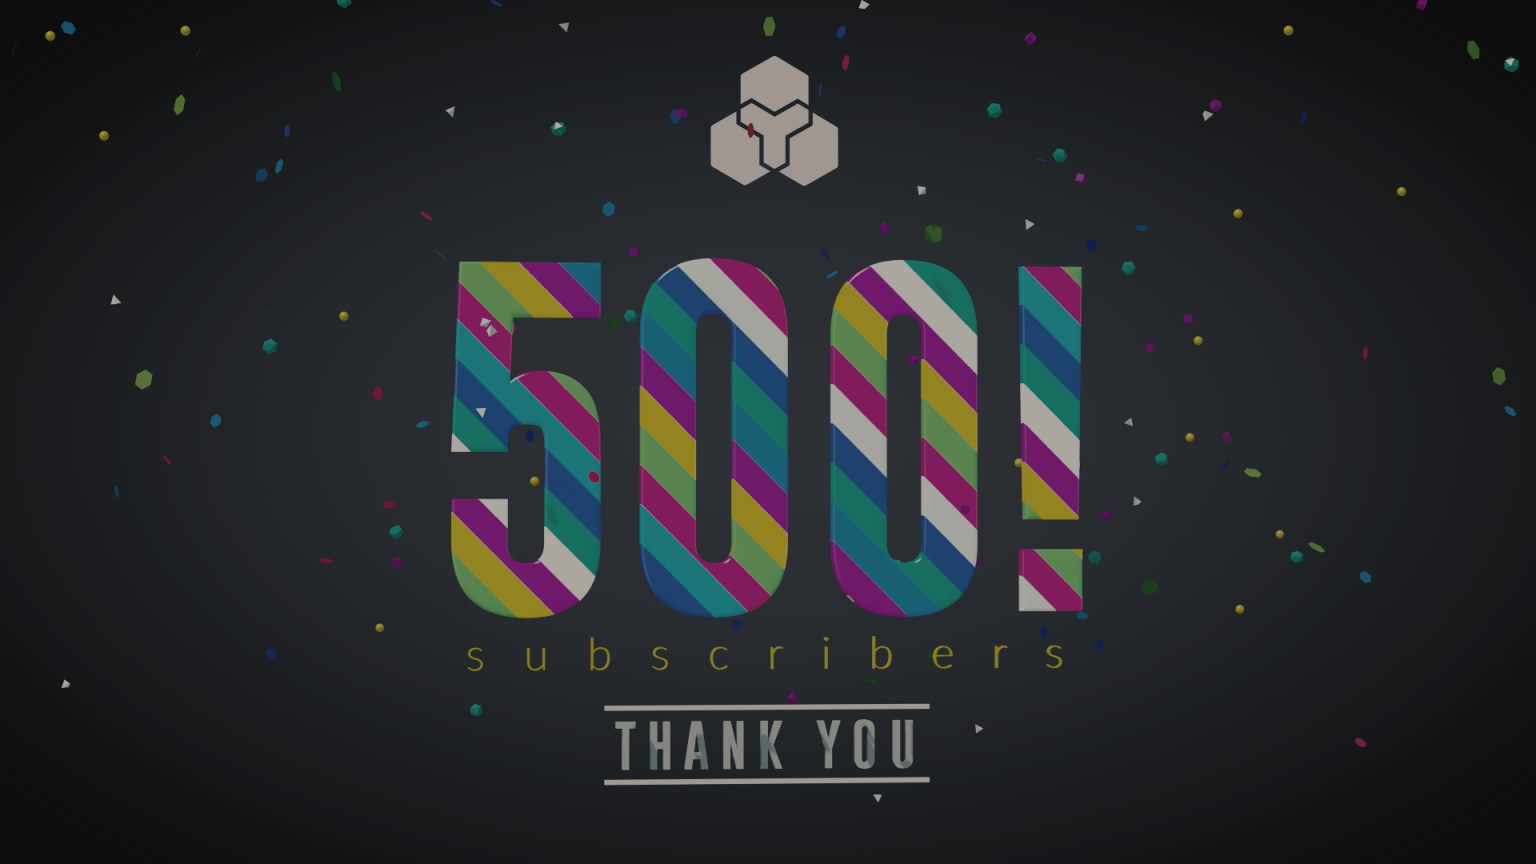 500 subscribers thank you